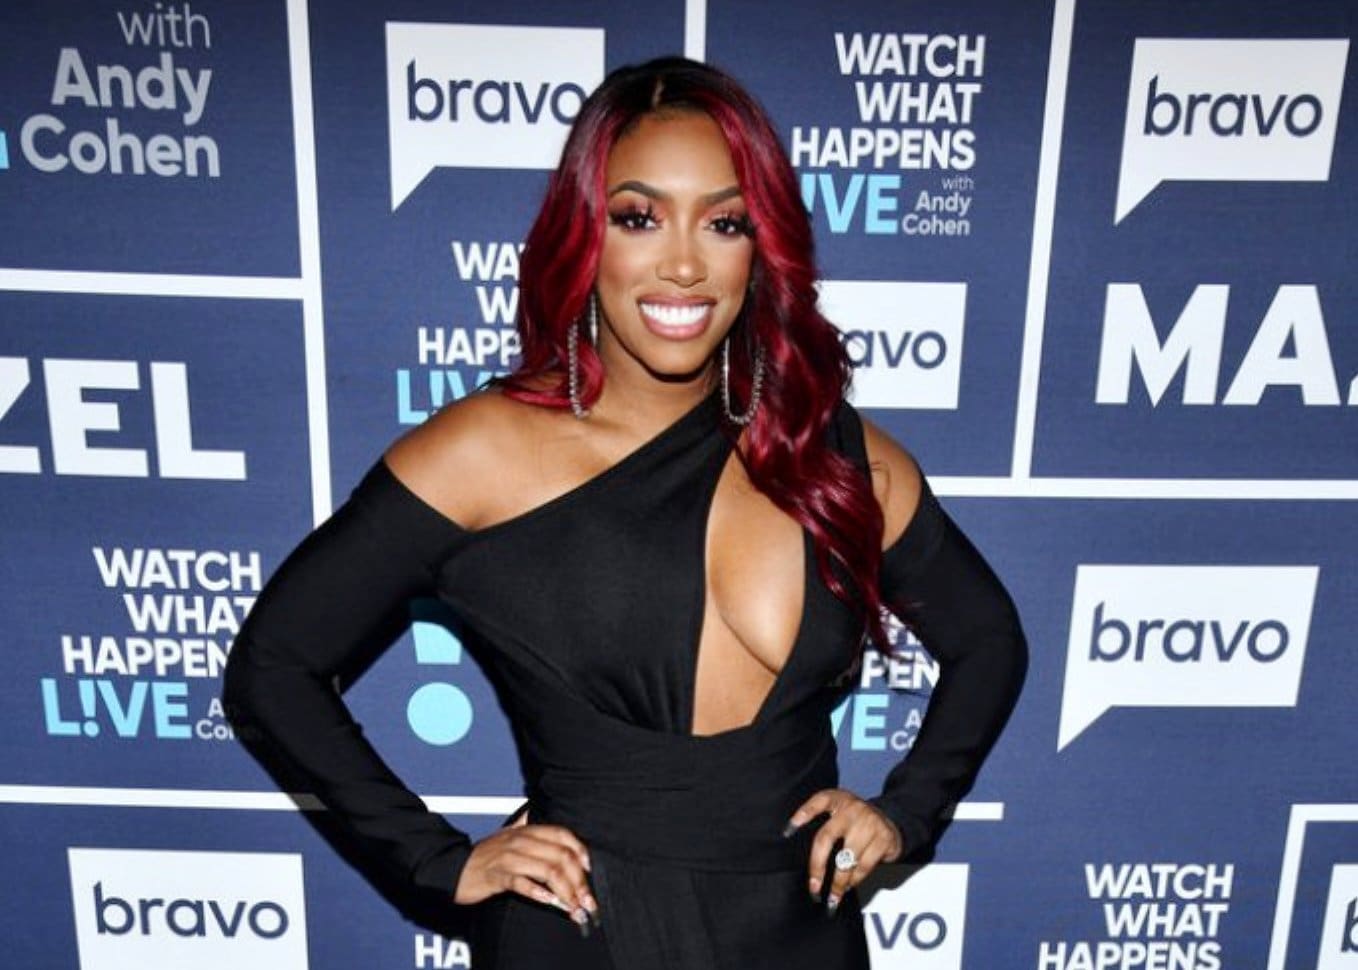 Porsha Williams Is Pushing It At The Gym Like There's No Tomorrow - Check Out Her Intense Workout Here